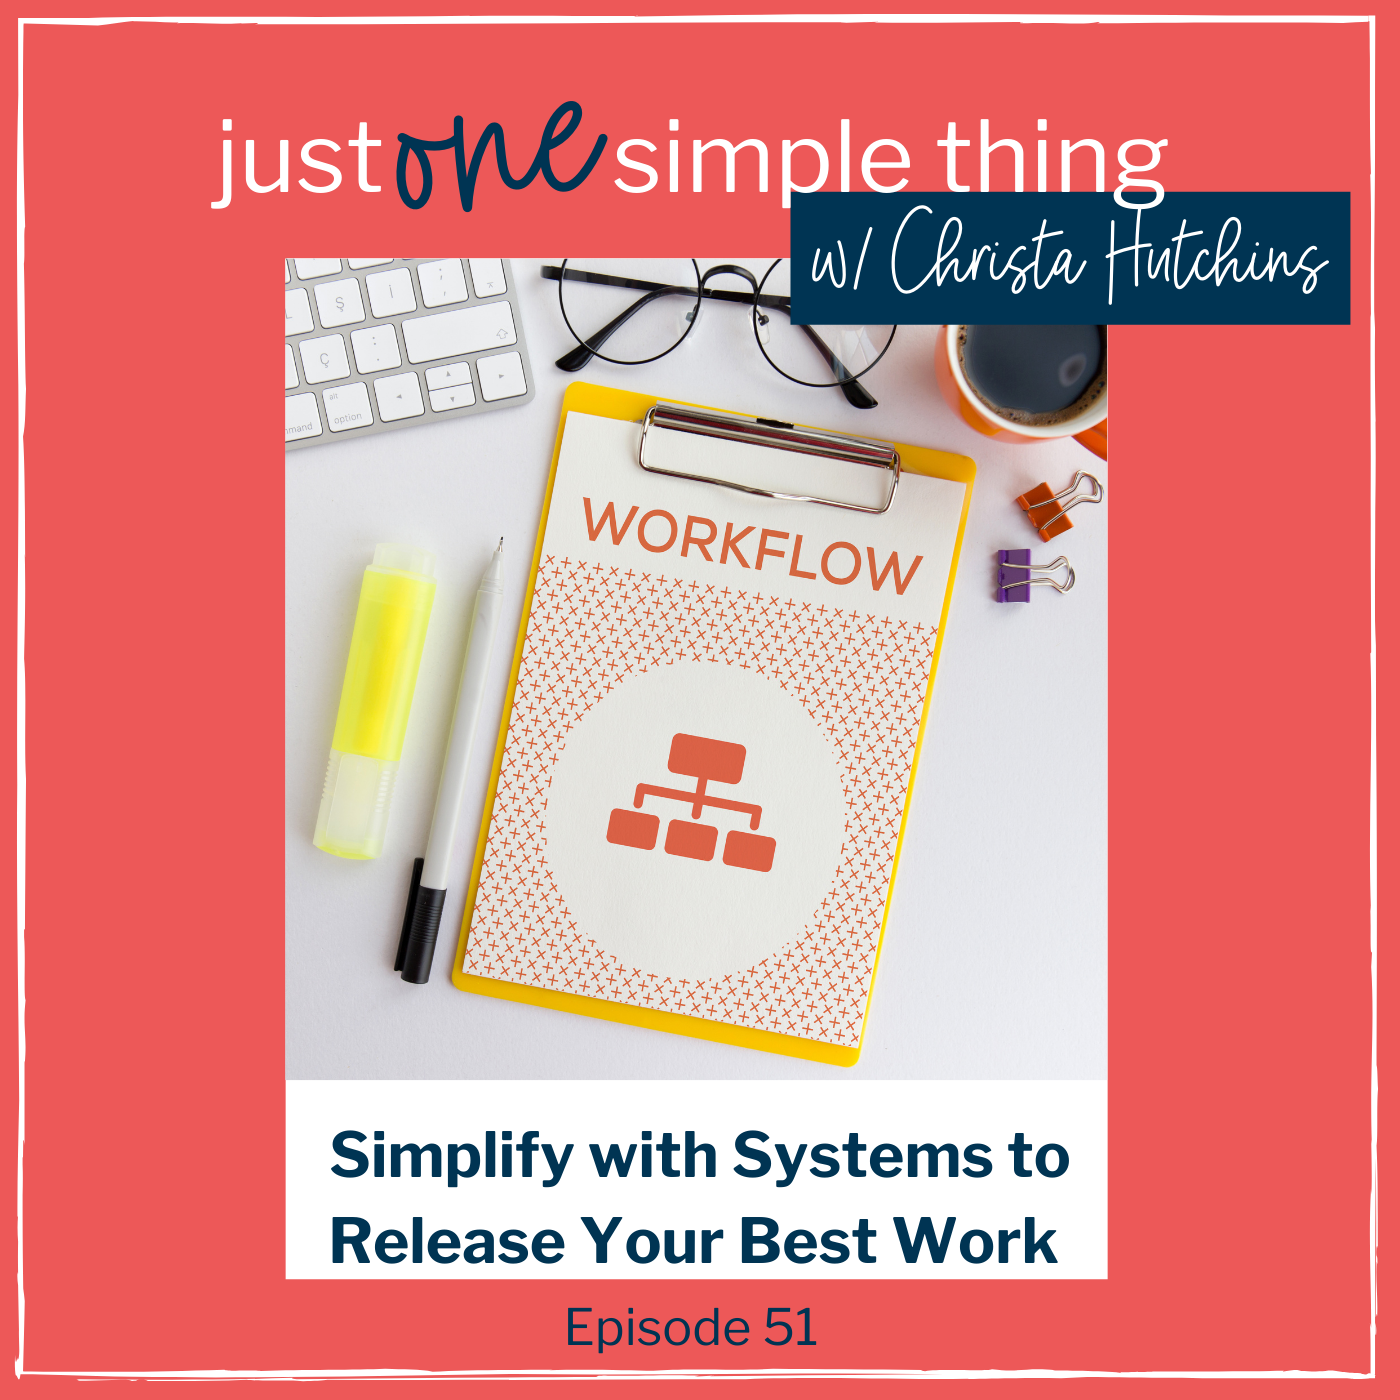 Simplify with Systems to Release Your Best Work